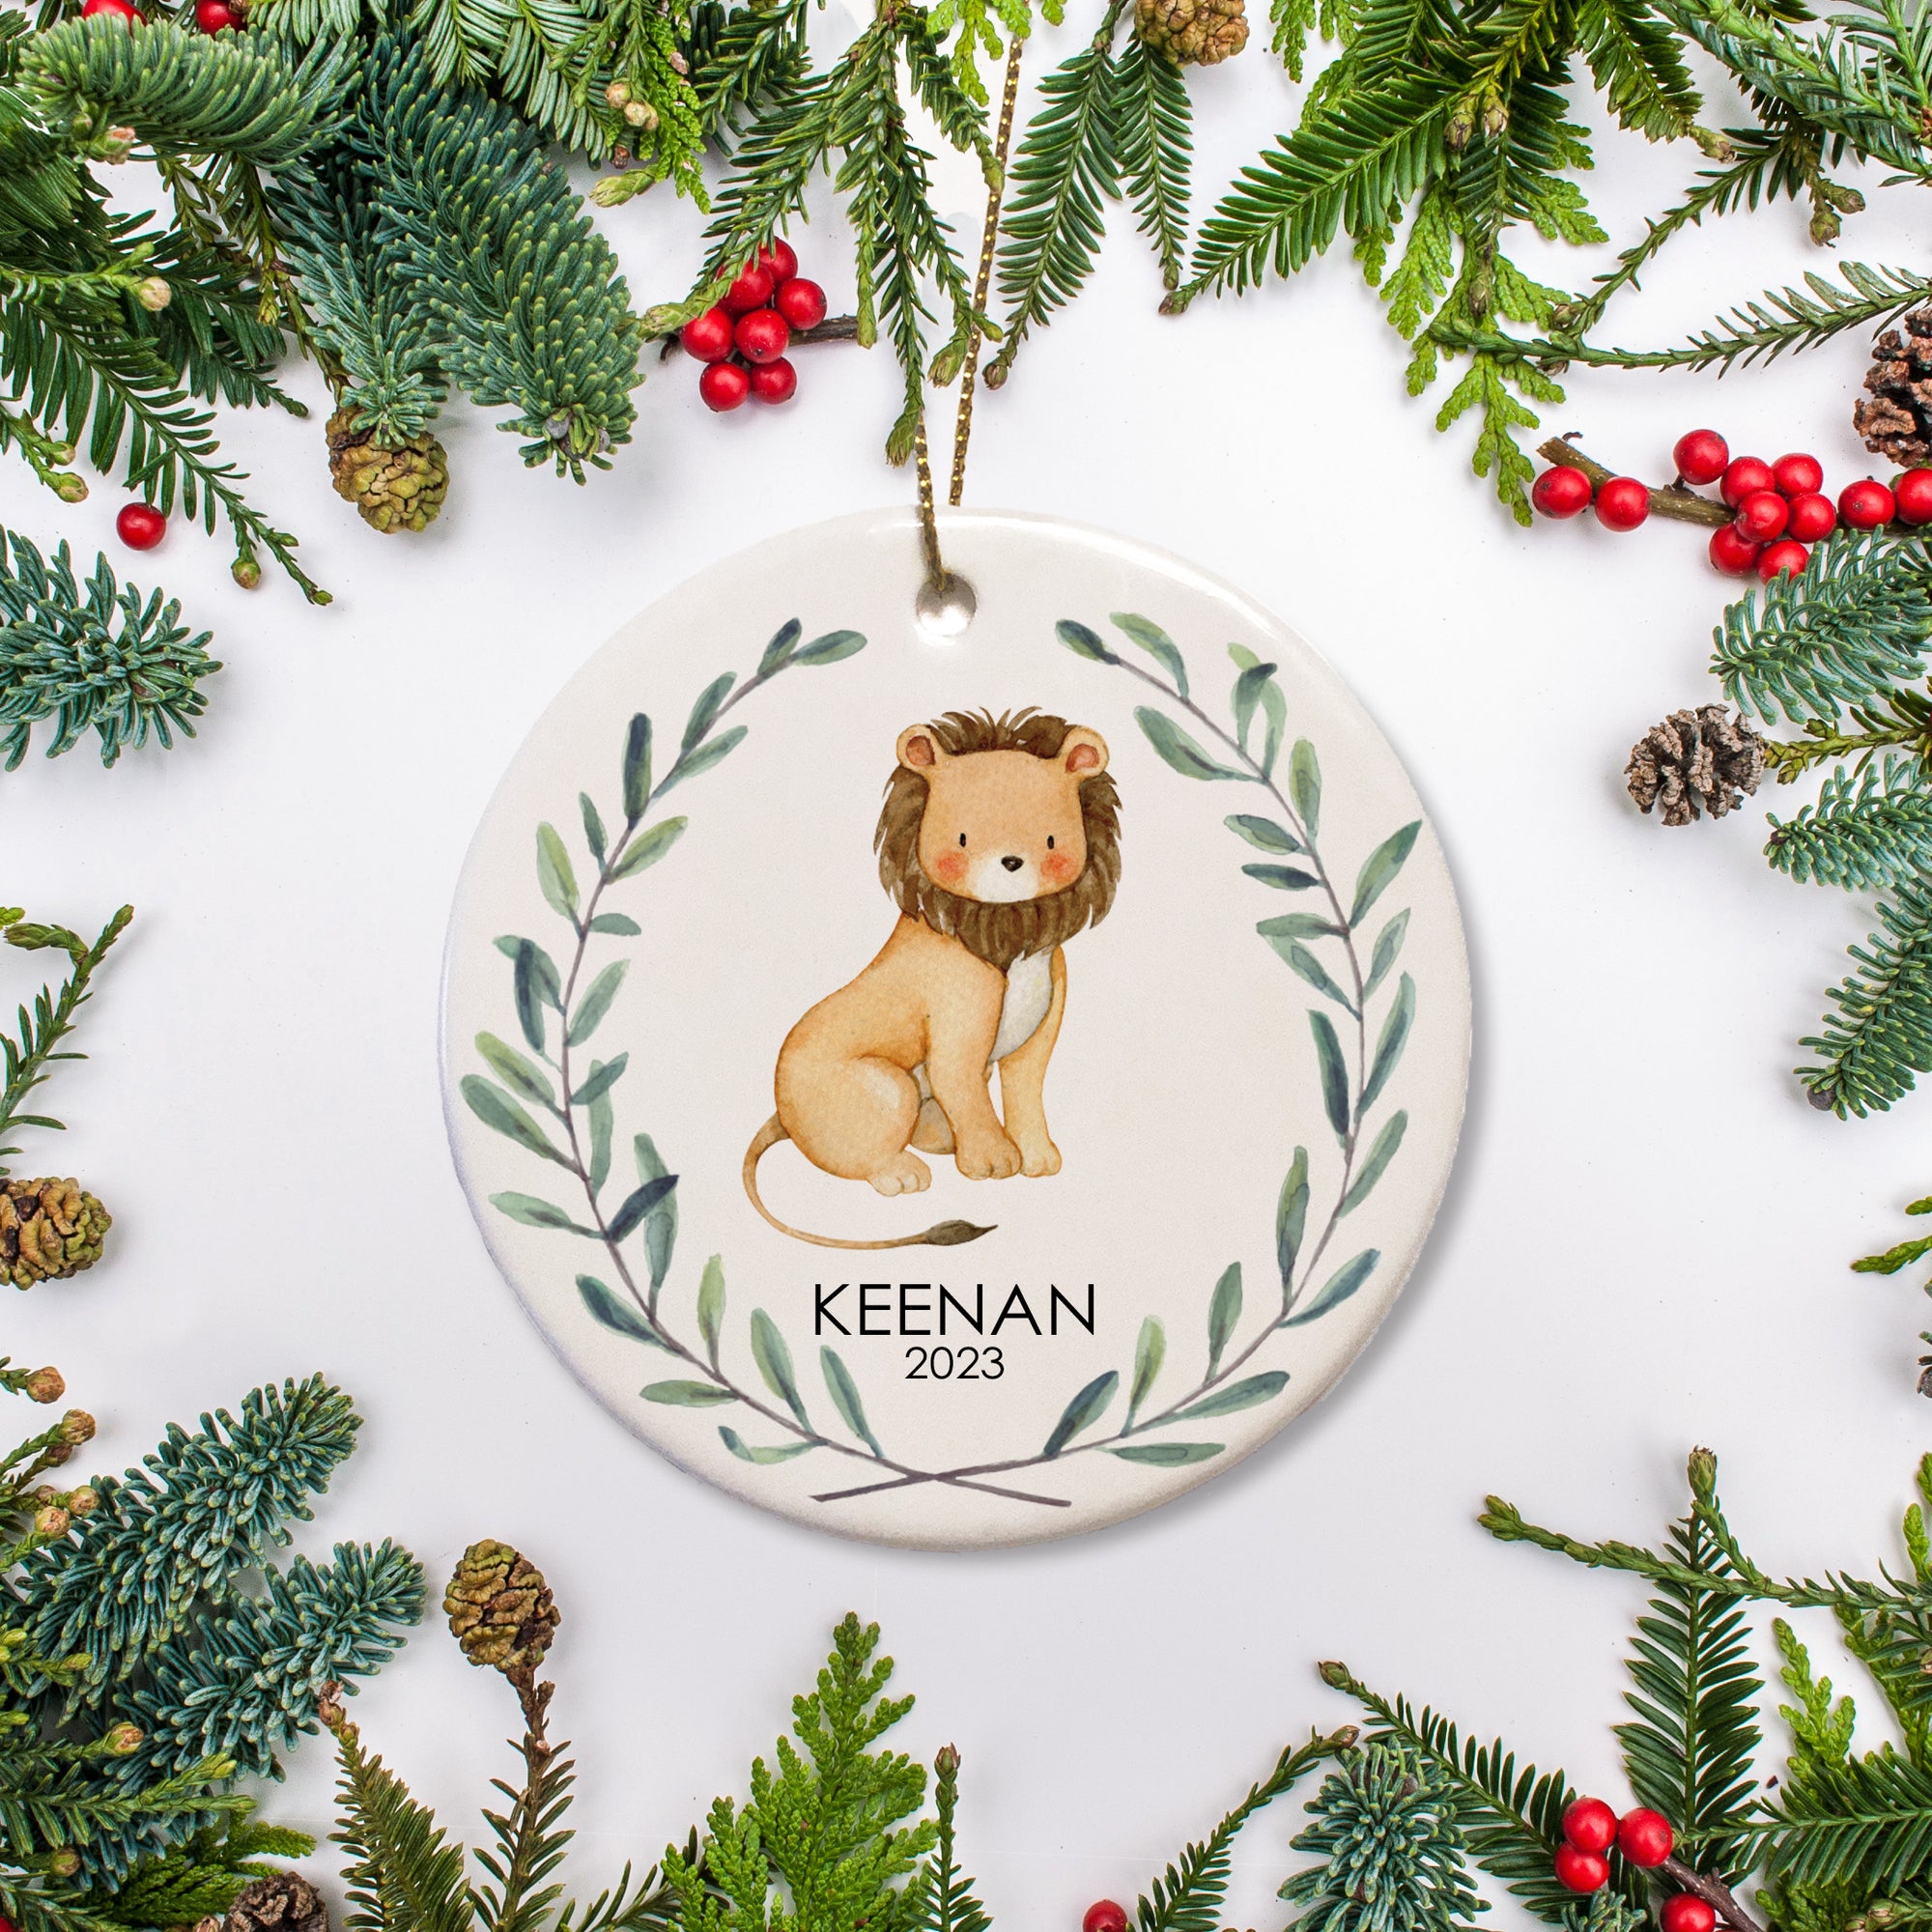 This personalized jungle ornament features a watercolor lion, along with the name and year of your choice. It is a lovely gift for a child or way to commemorate baby's first Christmas. You can even add a special message on the back!